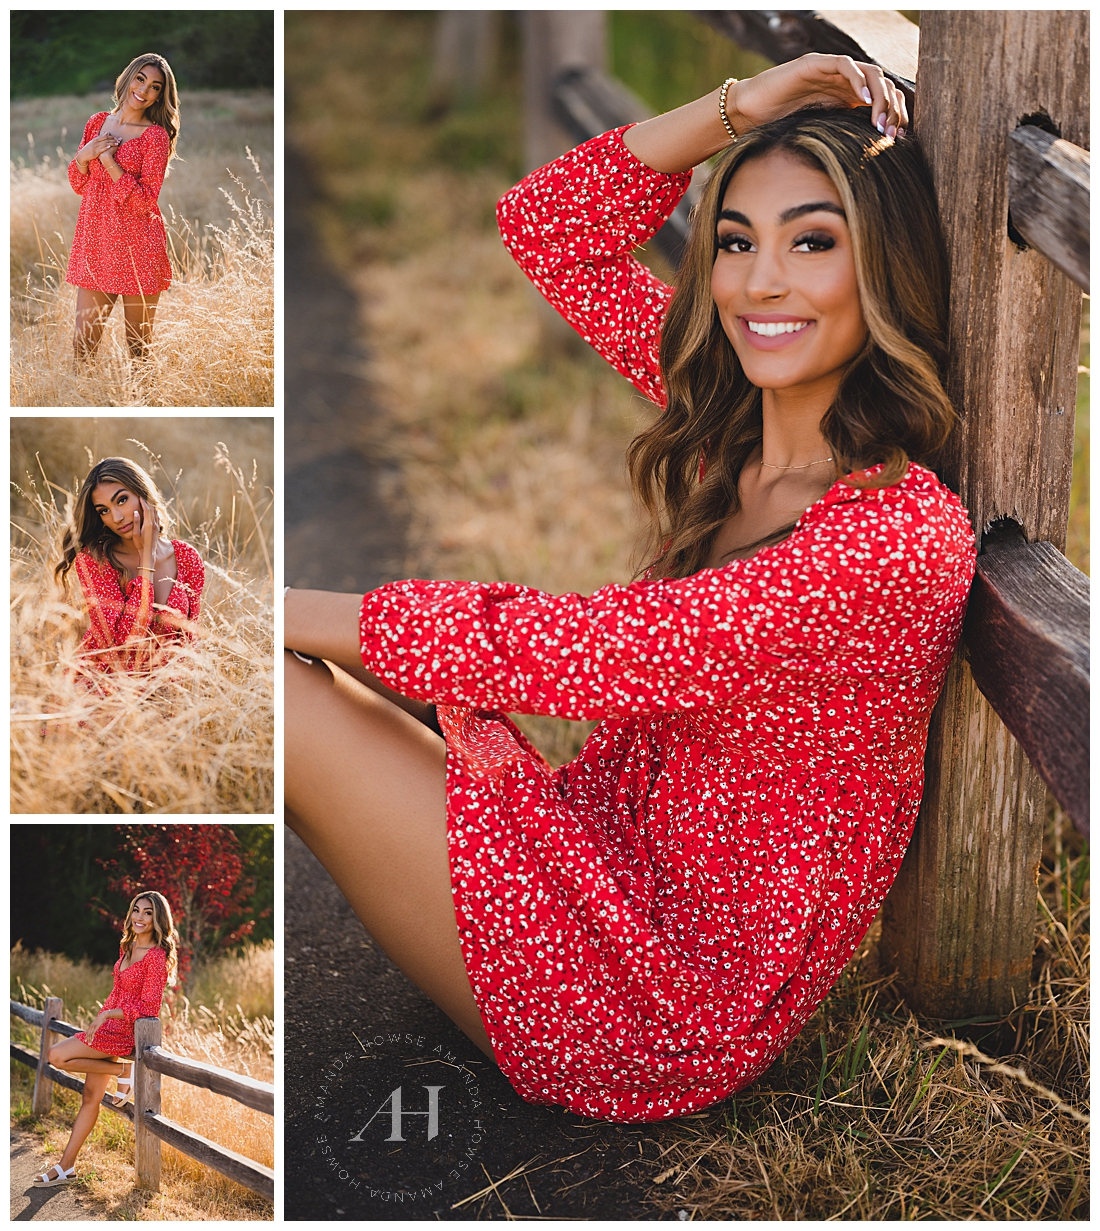 Best Red Dresses for Cute Summer Senior Portraits | Rustic Style Senior Photos in Golden Grass Field | Photographed by the Best Tacoma Senior Photographer Amanda Howse Photography